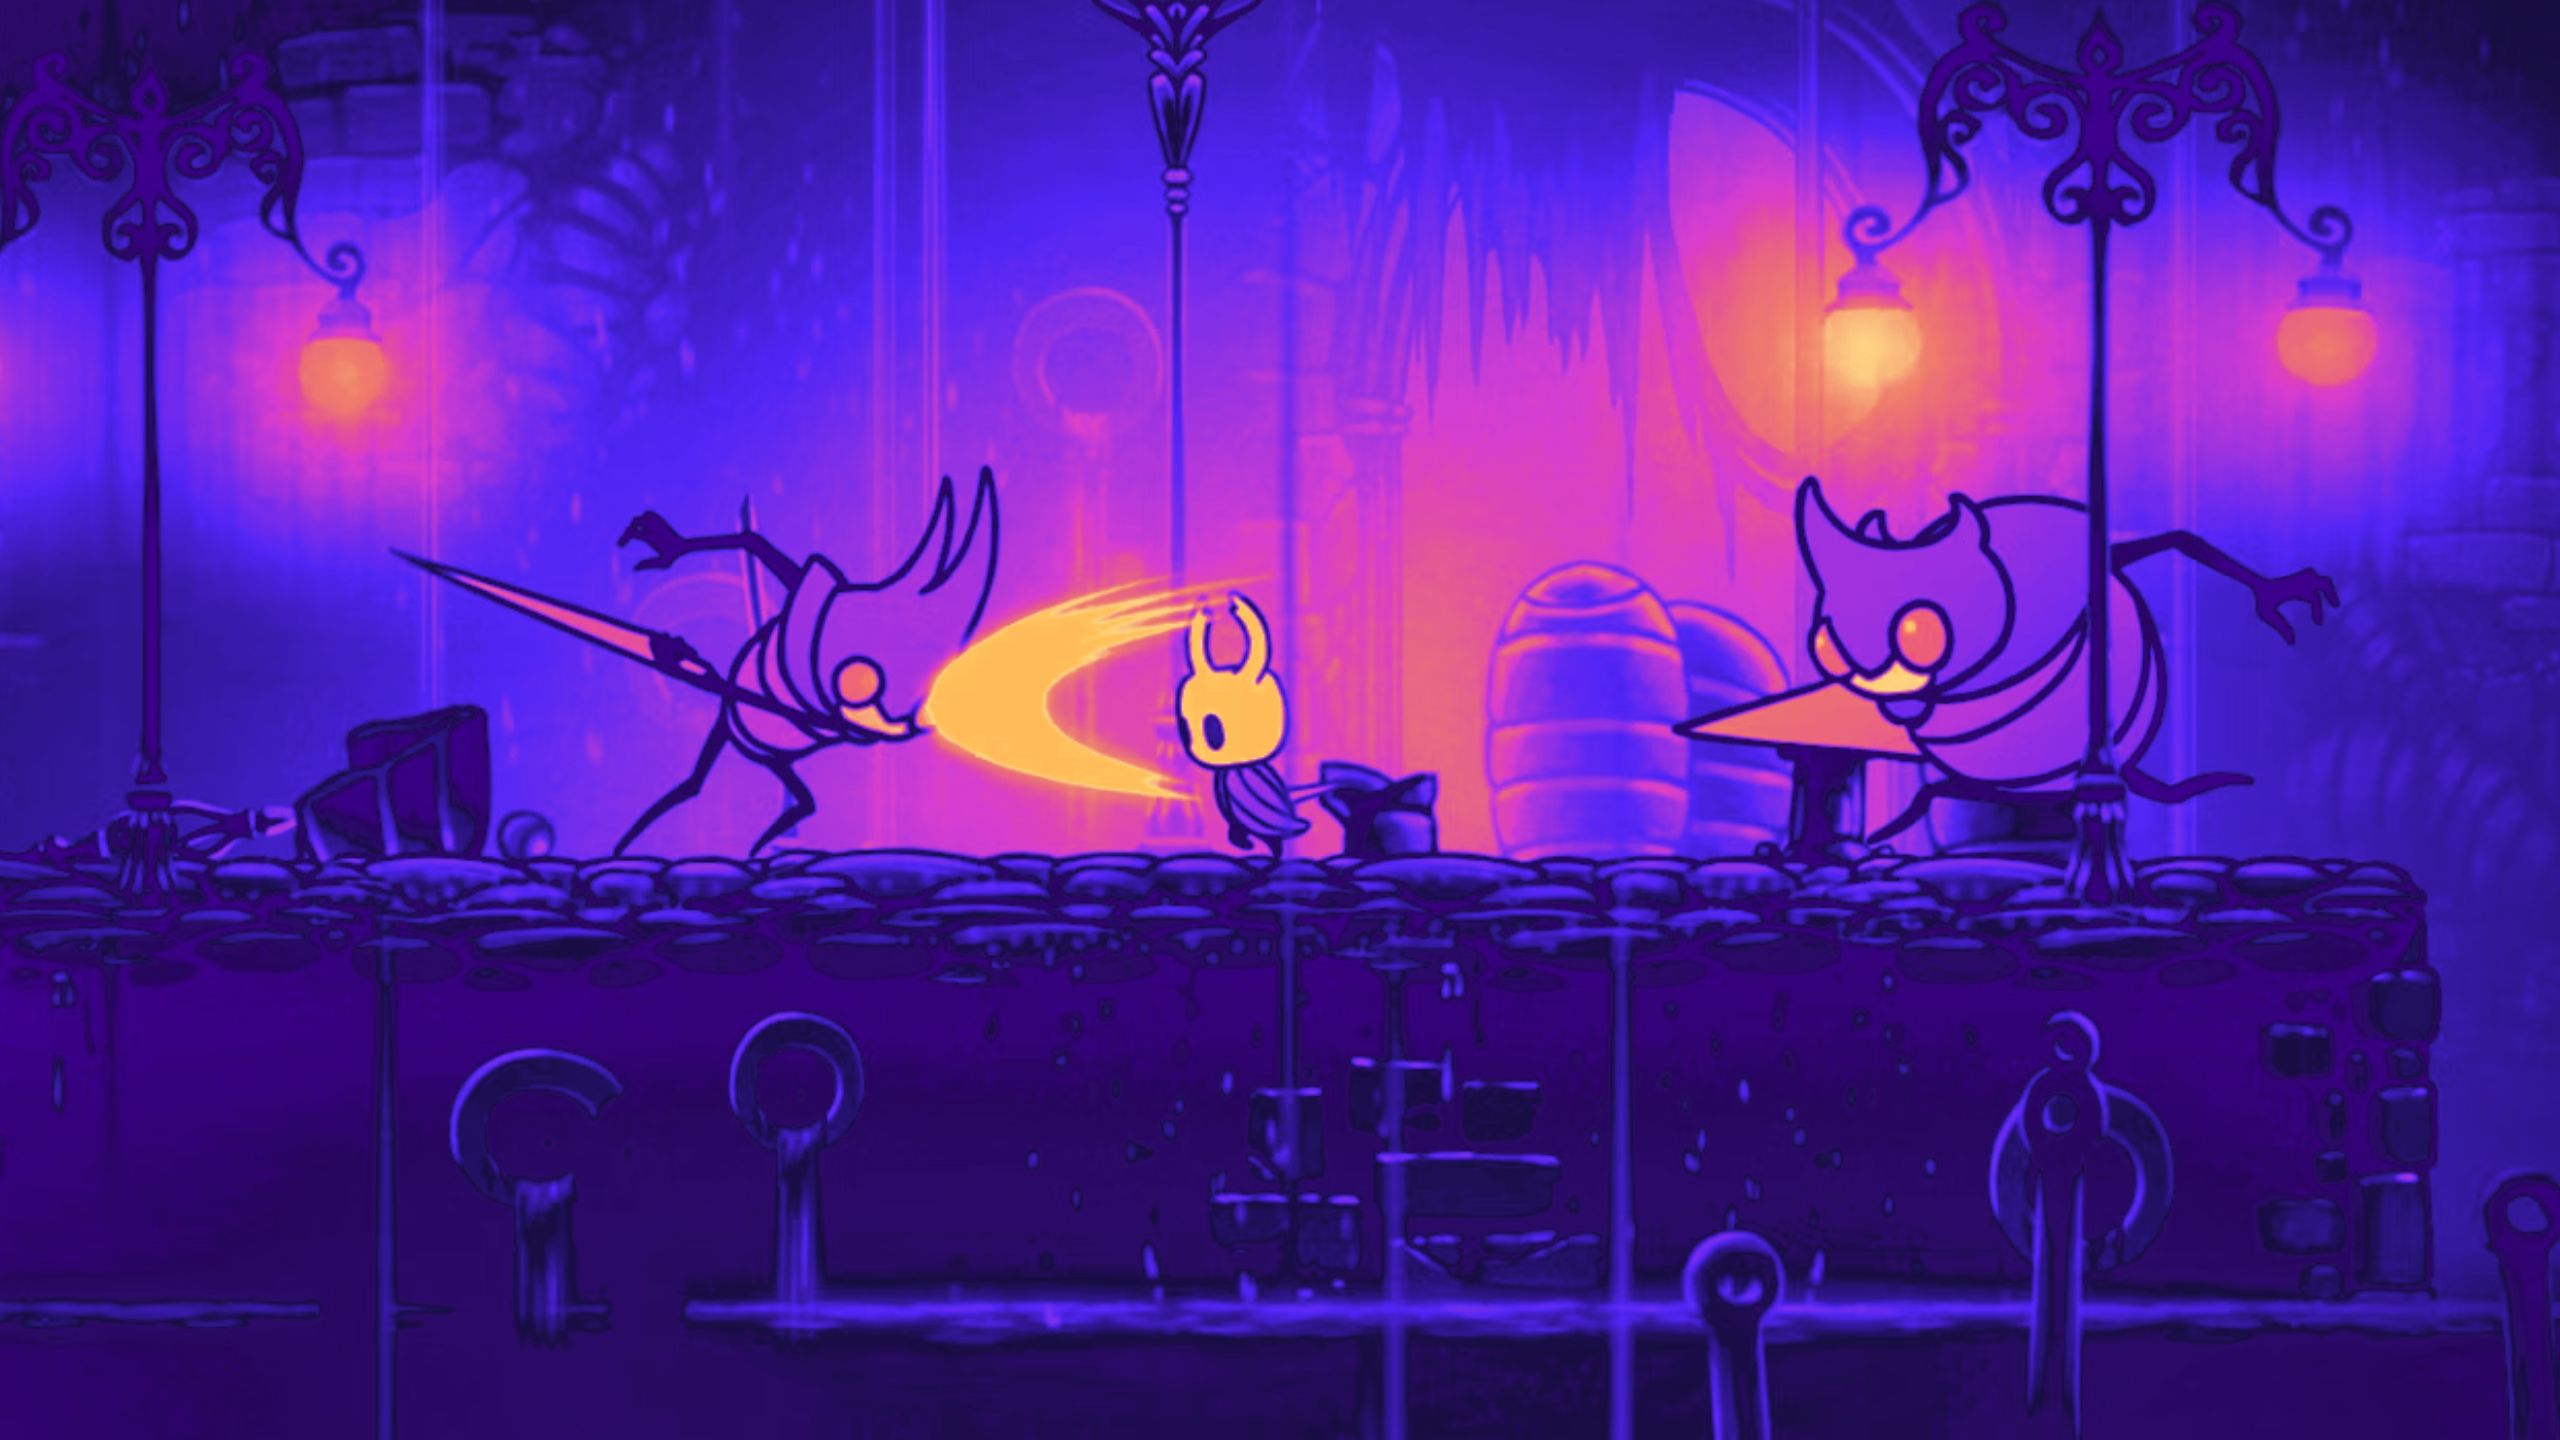 A fight scene from the game Hollow Knight